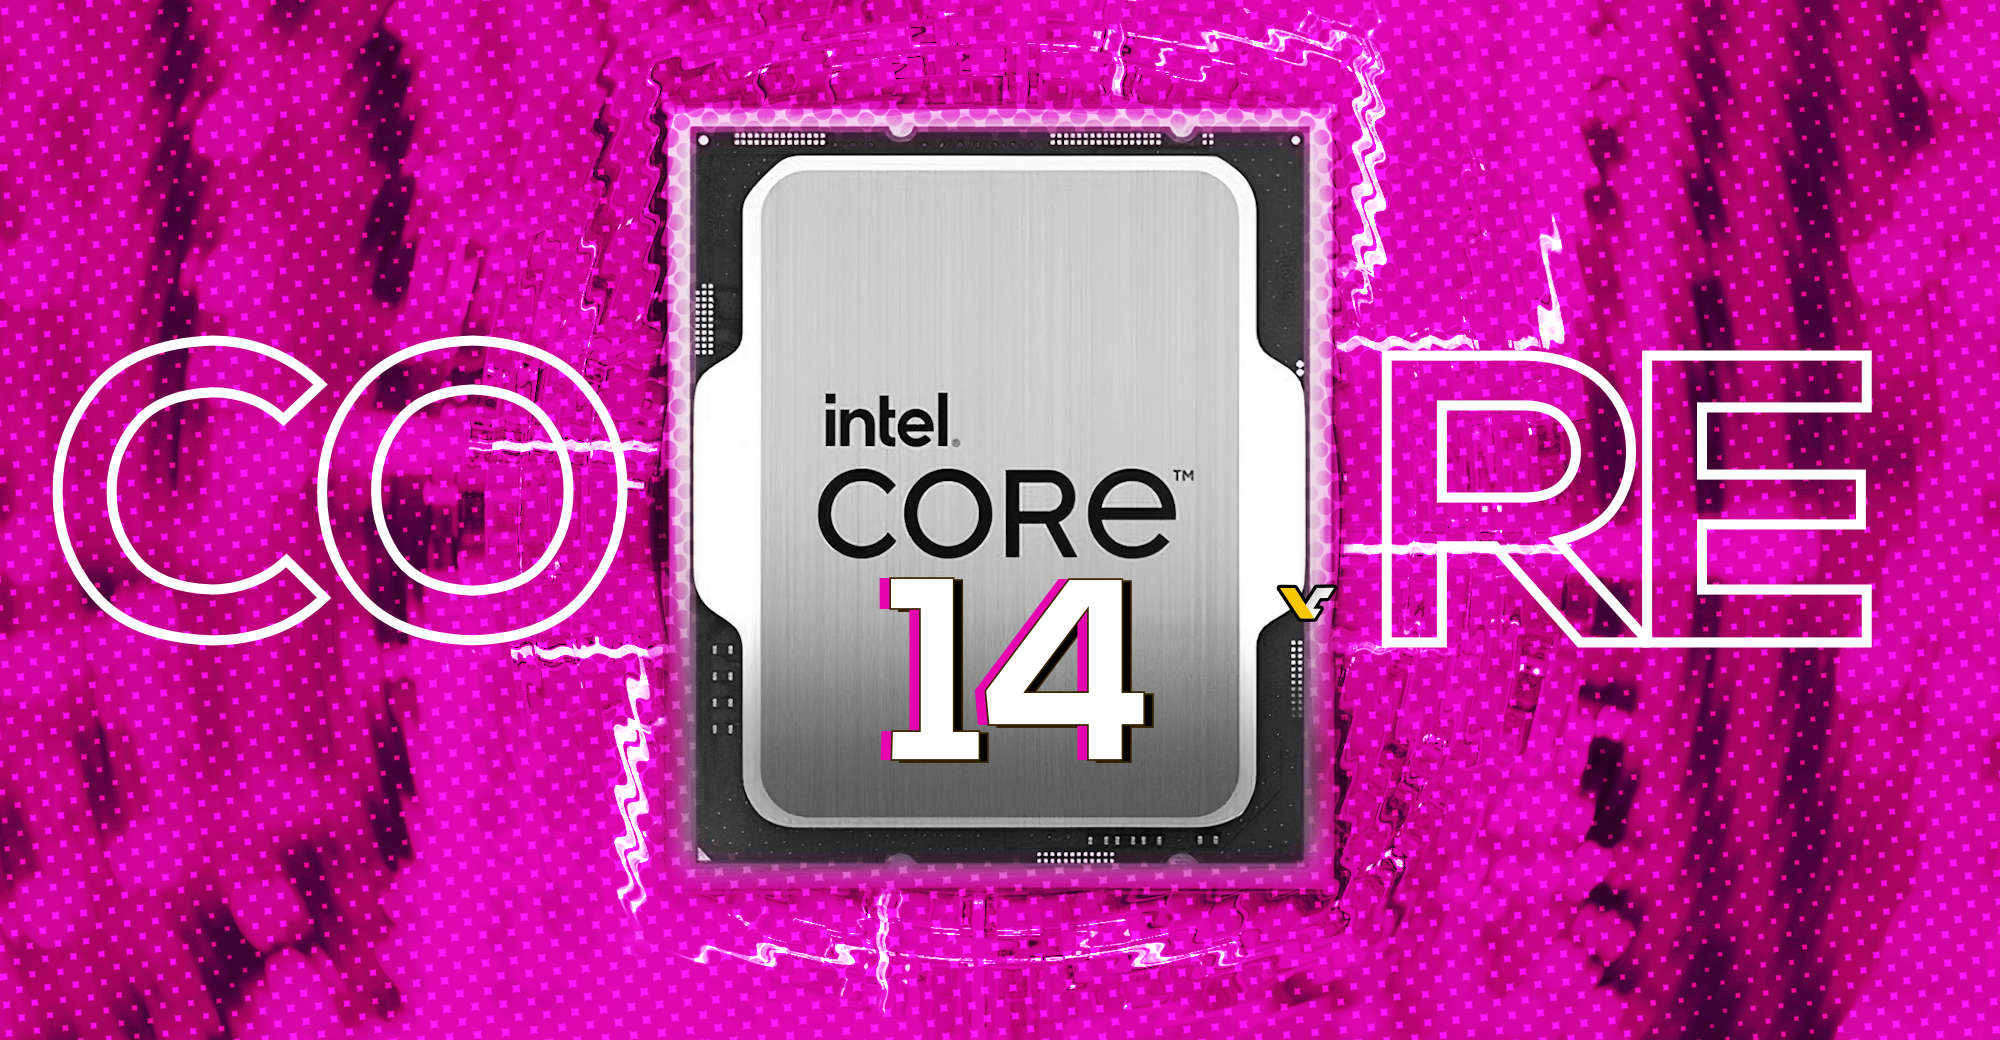 Intel to launch 14th Gen Core non-K desktop CPUs on January 8th